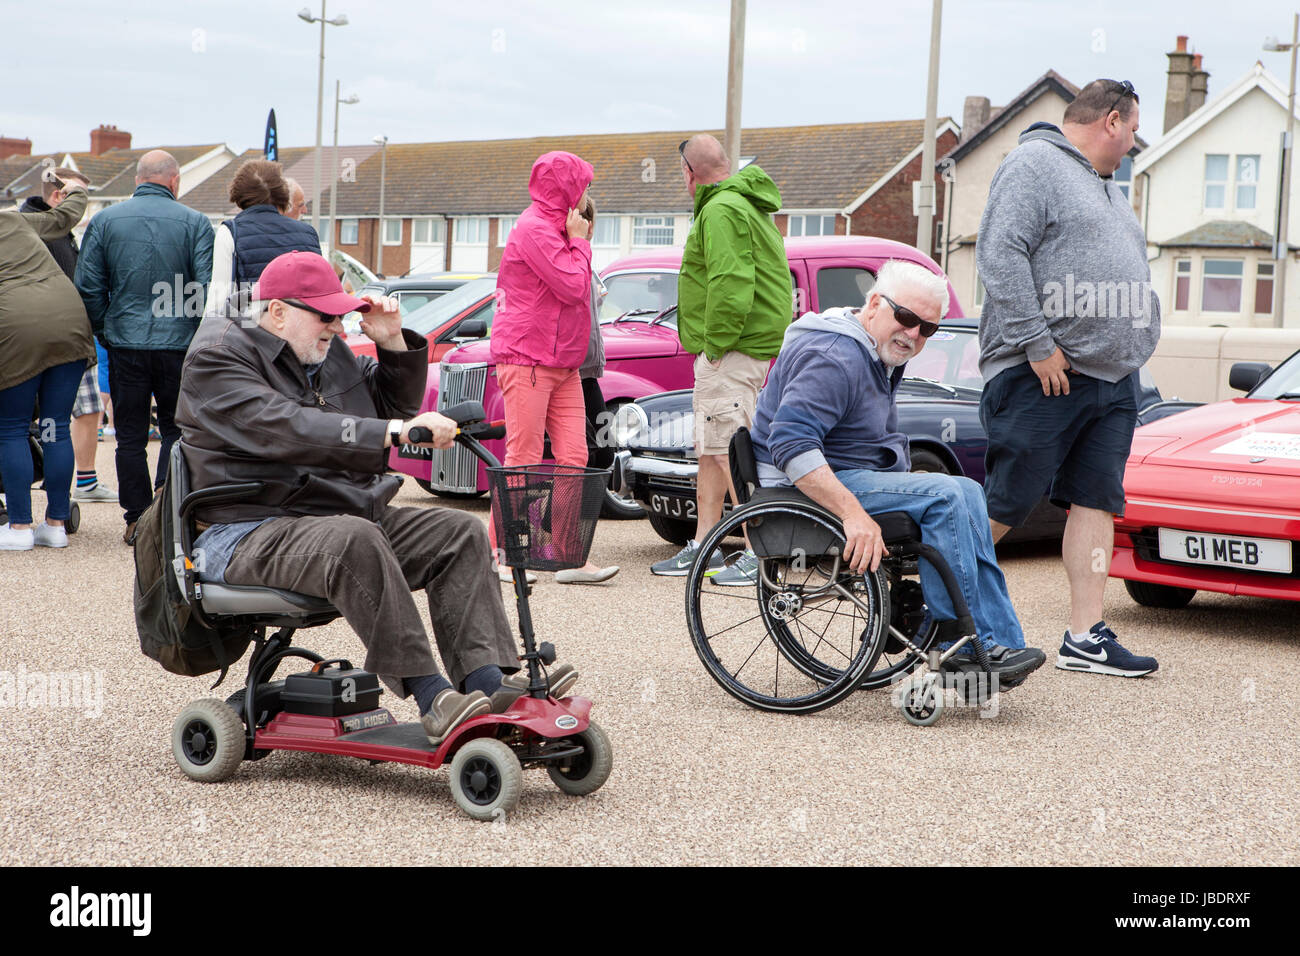 The Cleveleys Car Show is a yearly event which is staged along Victoria Road West and the Sea front Promenade in Cleveleys, Blackpool, UK. Stock Photo